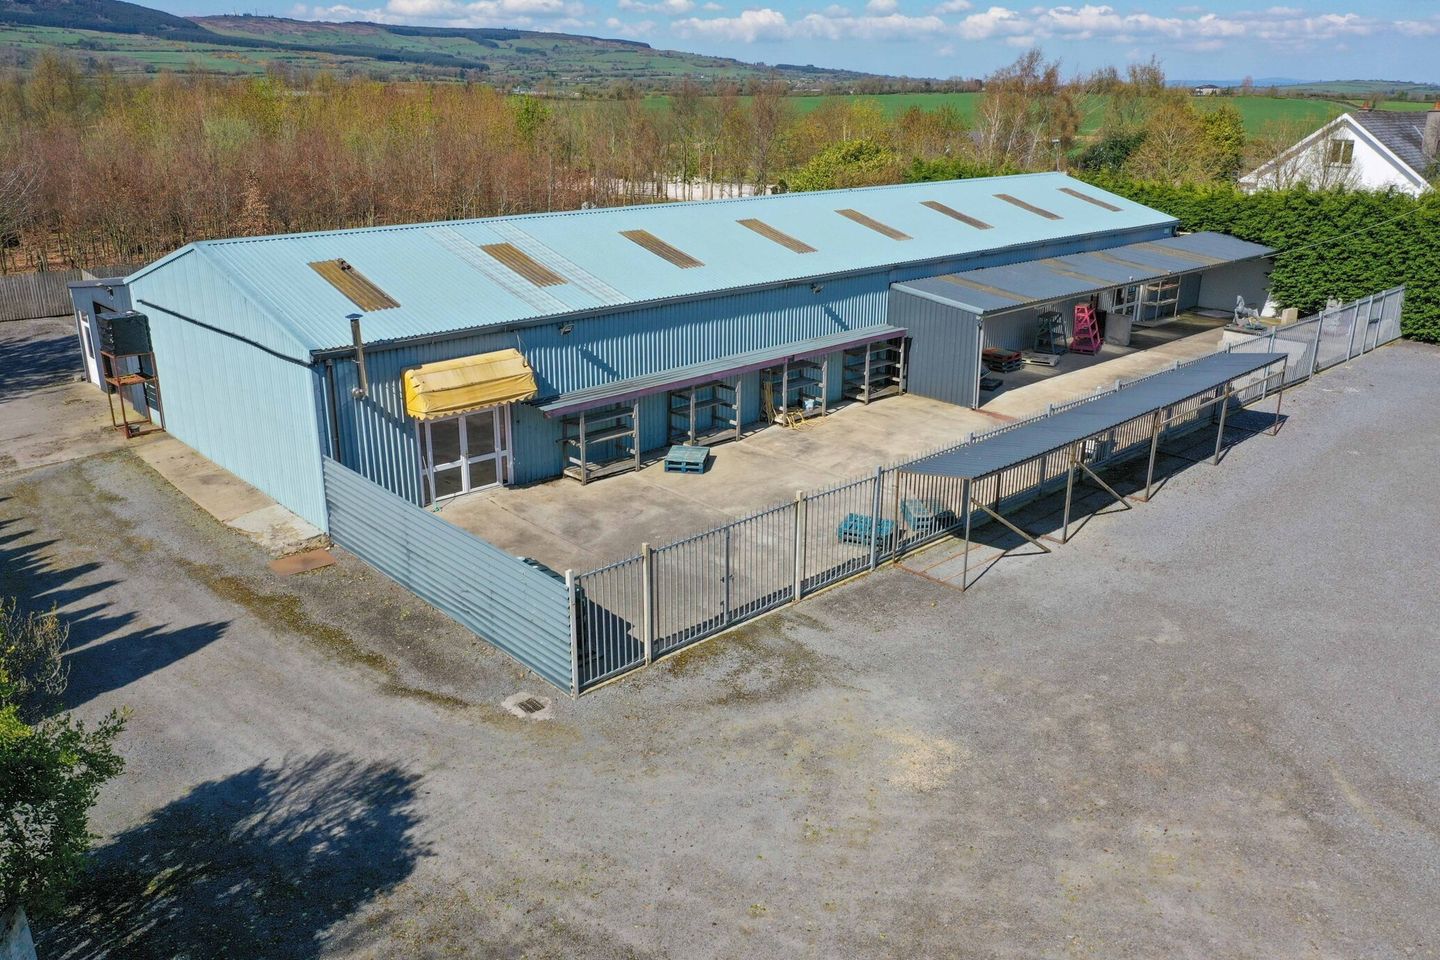 Commercial Premises On C. 2.5 Acres, Knocka, Templemore, Co. Tipperary